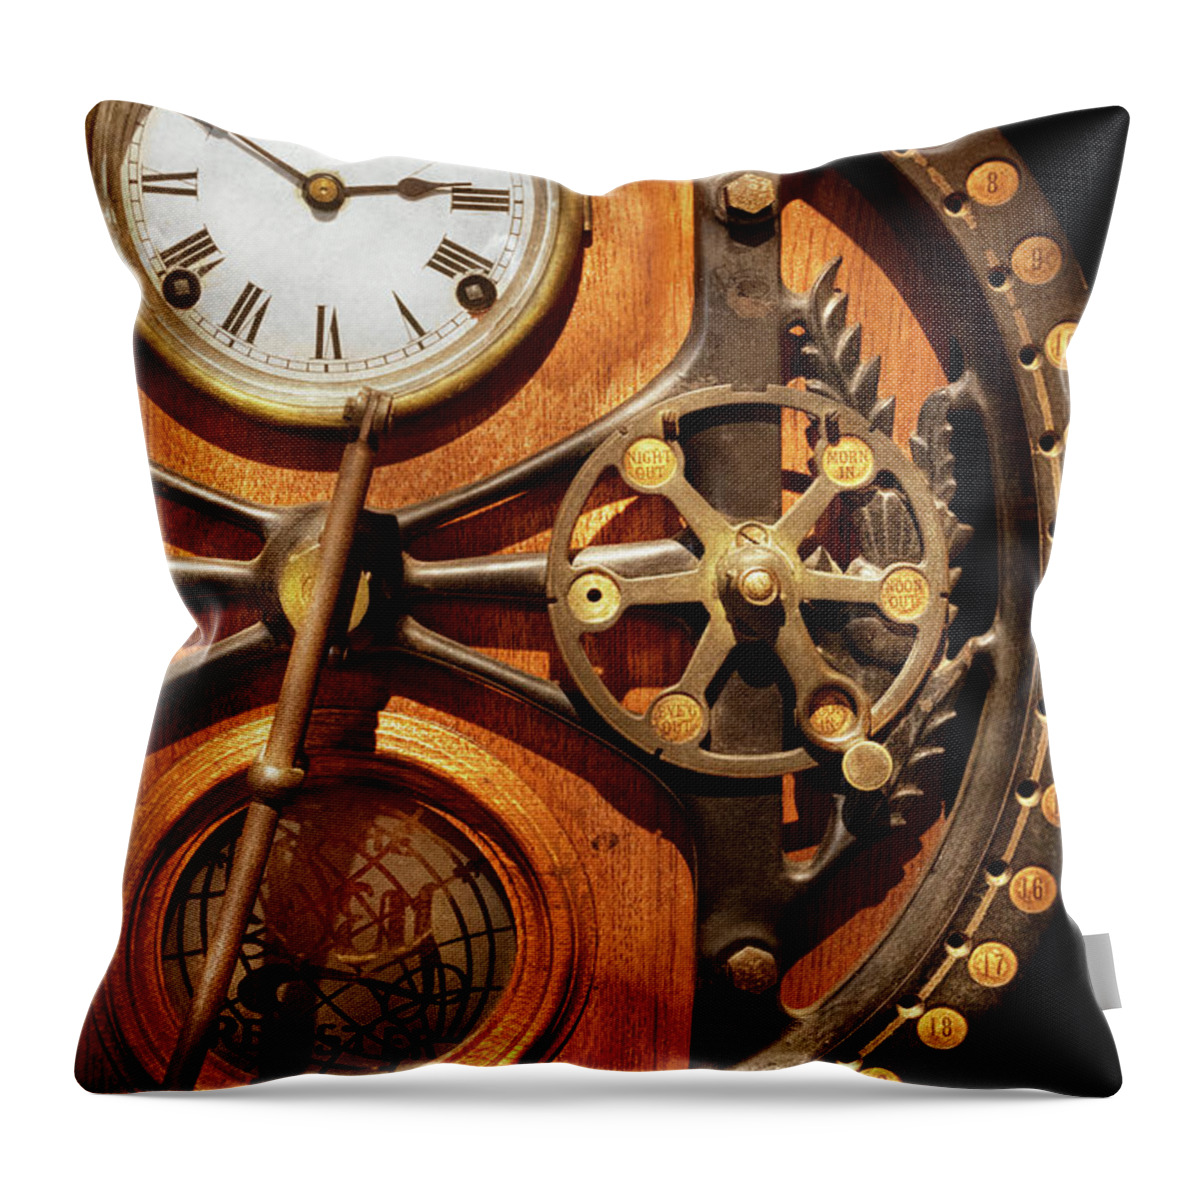 Steampunk Art Throw Pillow featuring the photograph Steampunk - Clock - The dial recorder by Mike Savad